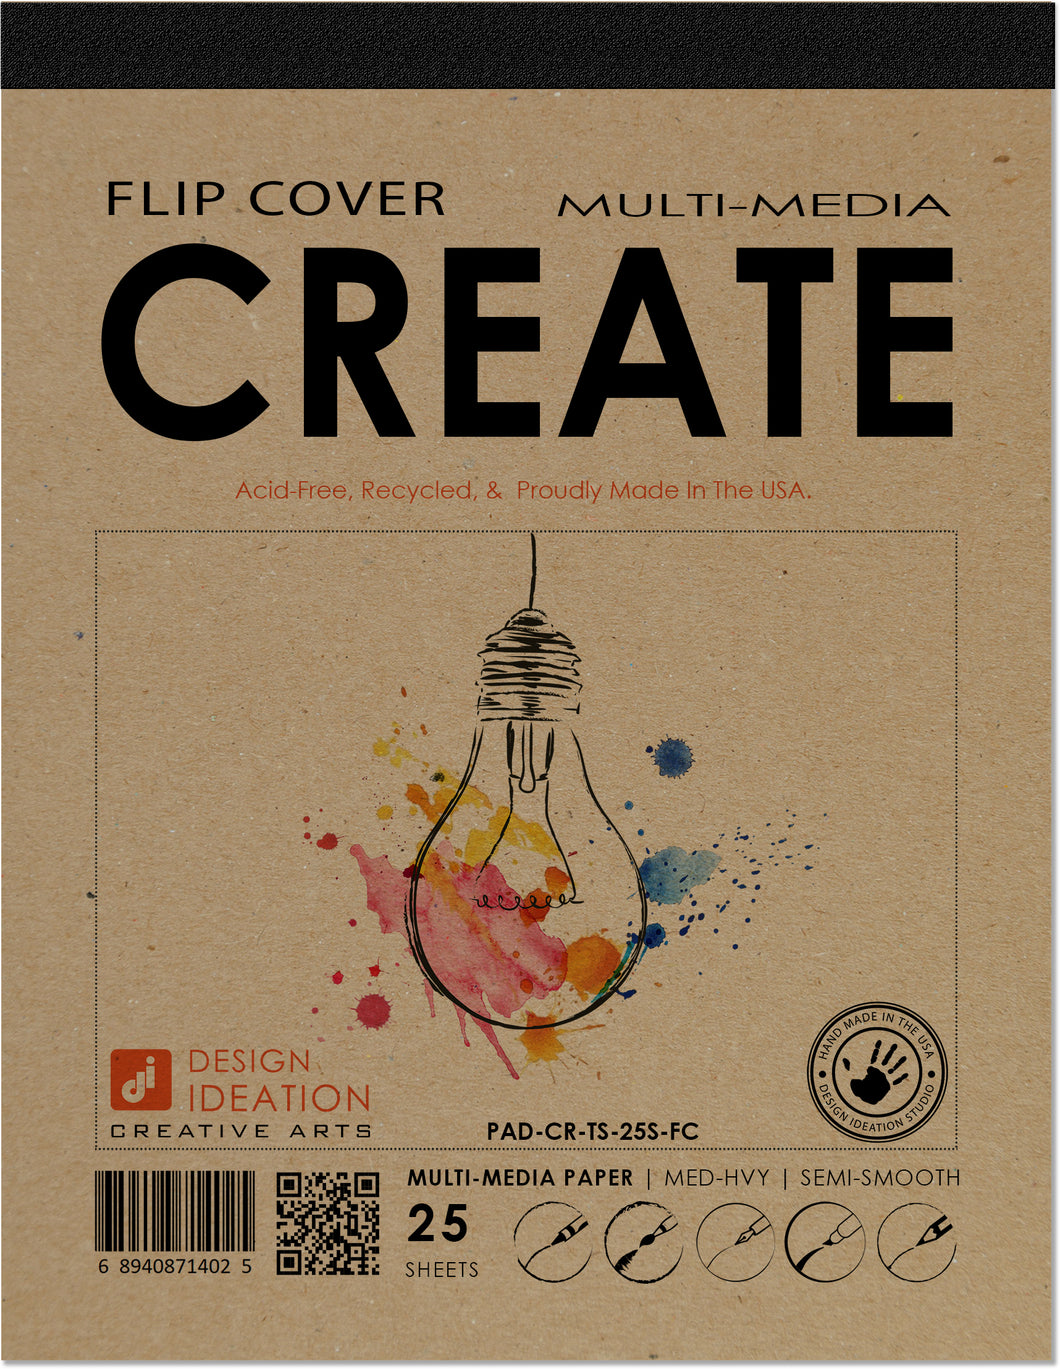 FLIP COVER Sketch Pad : Multi Media CREATIVE PROJECT Sketch Pad for Pencil, Ink, Marker, Charcoal and Watercolor Paints. (8.5